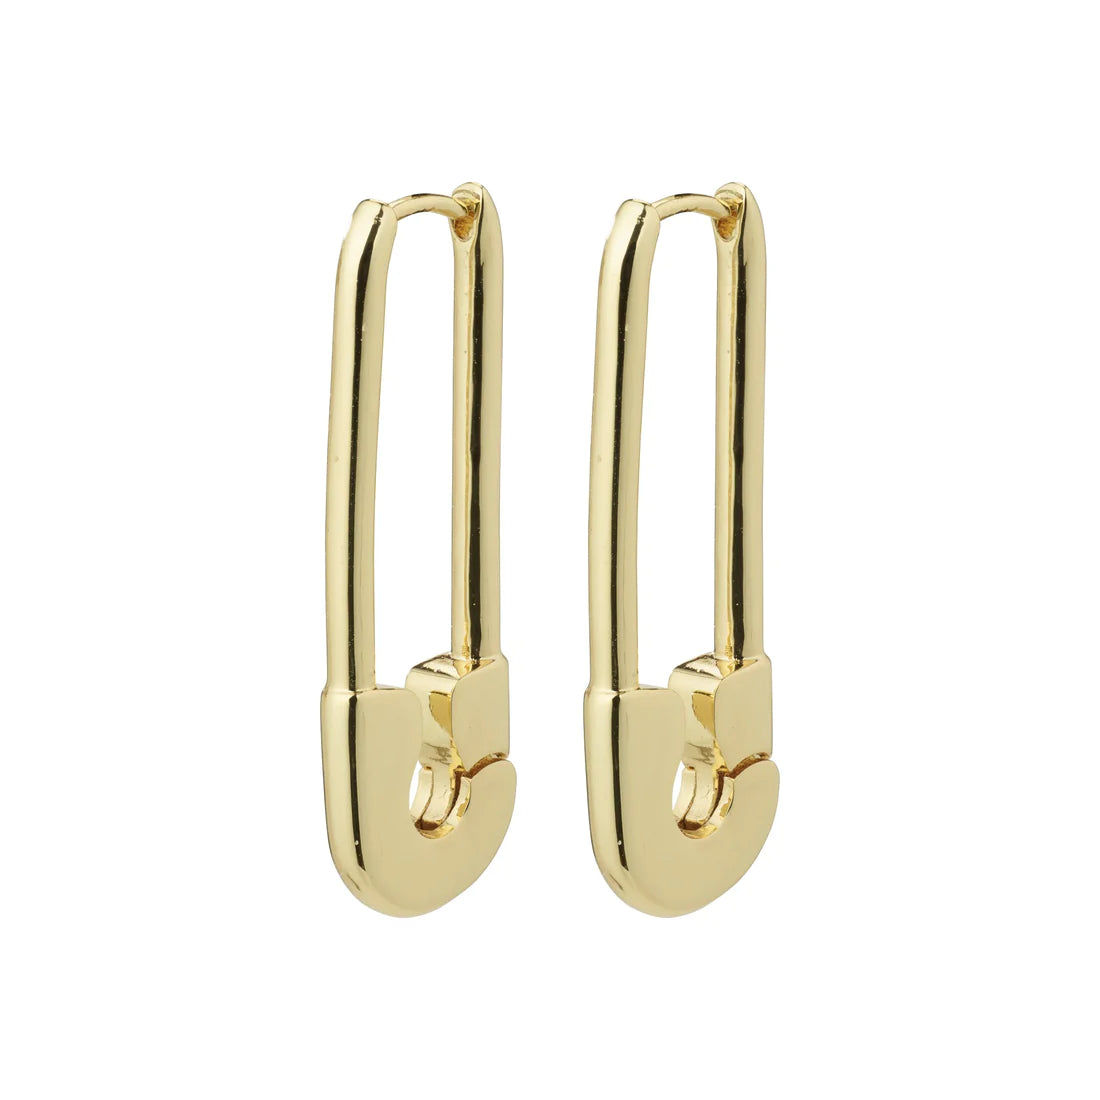 Pace Recycled Safety Pin Earrings